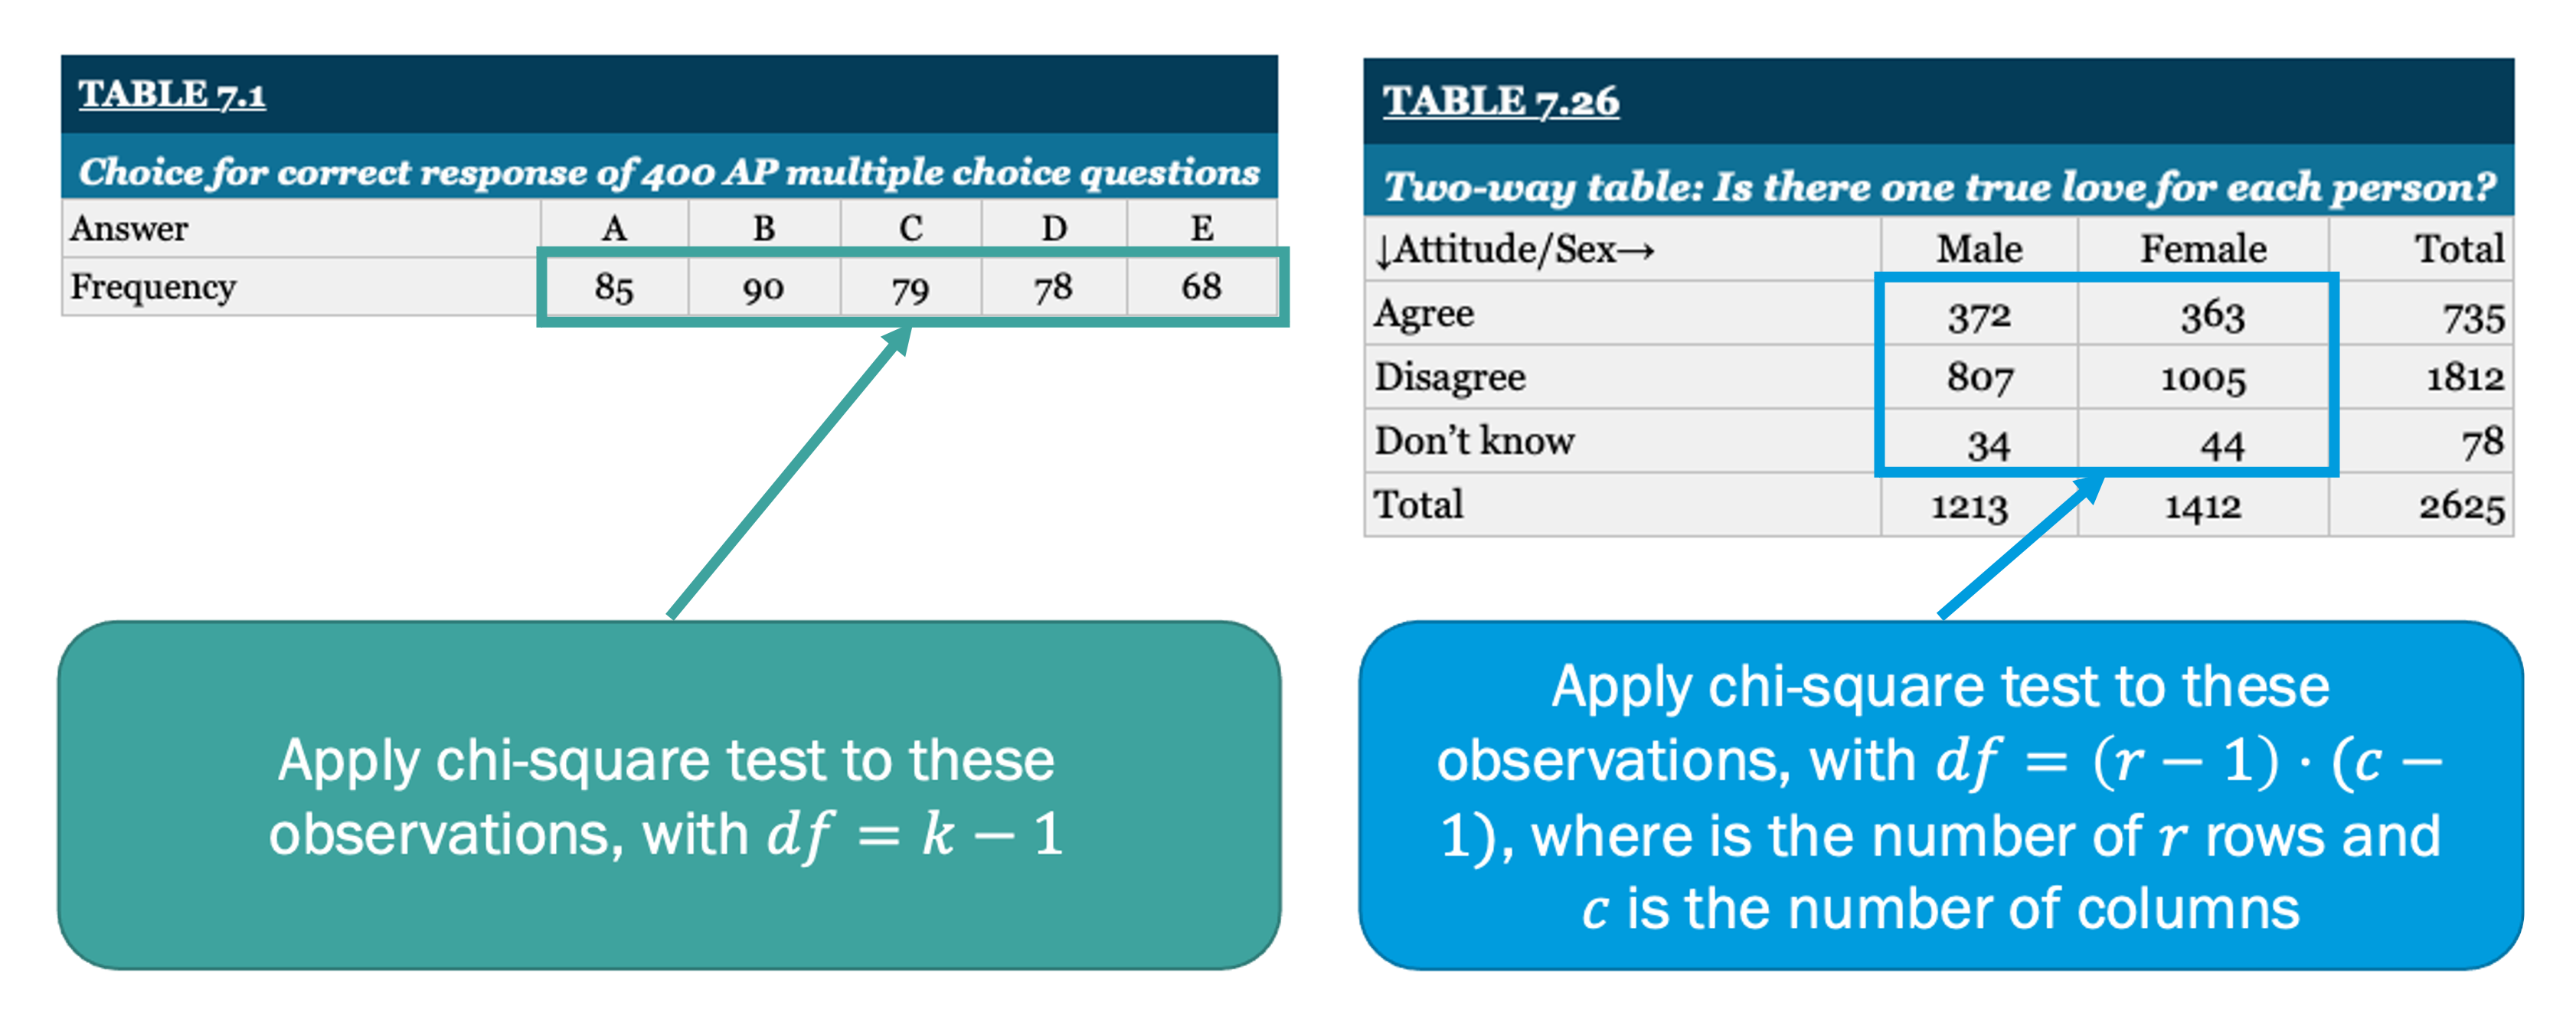 Two-way chi square table vs One-way. See image description below